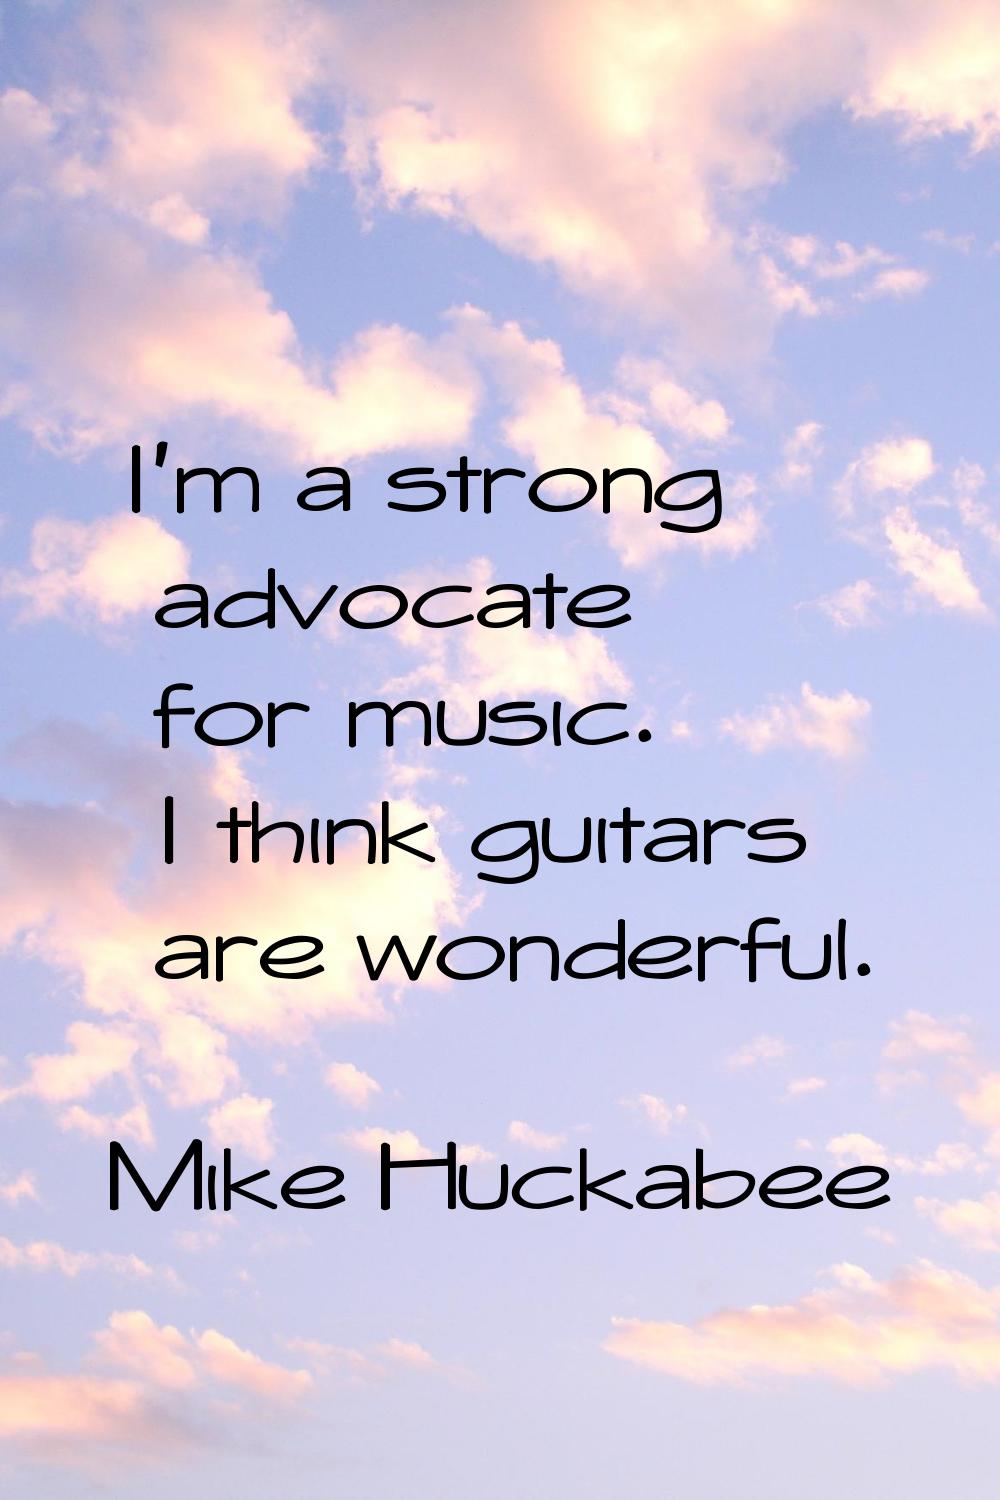 I'm a strong advocate for music. I think guitars are wonderful.